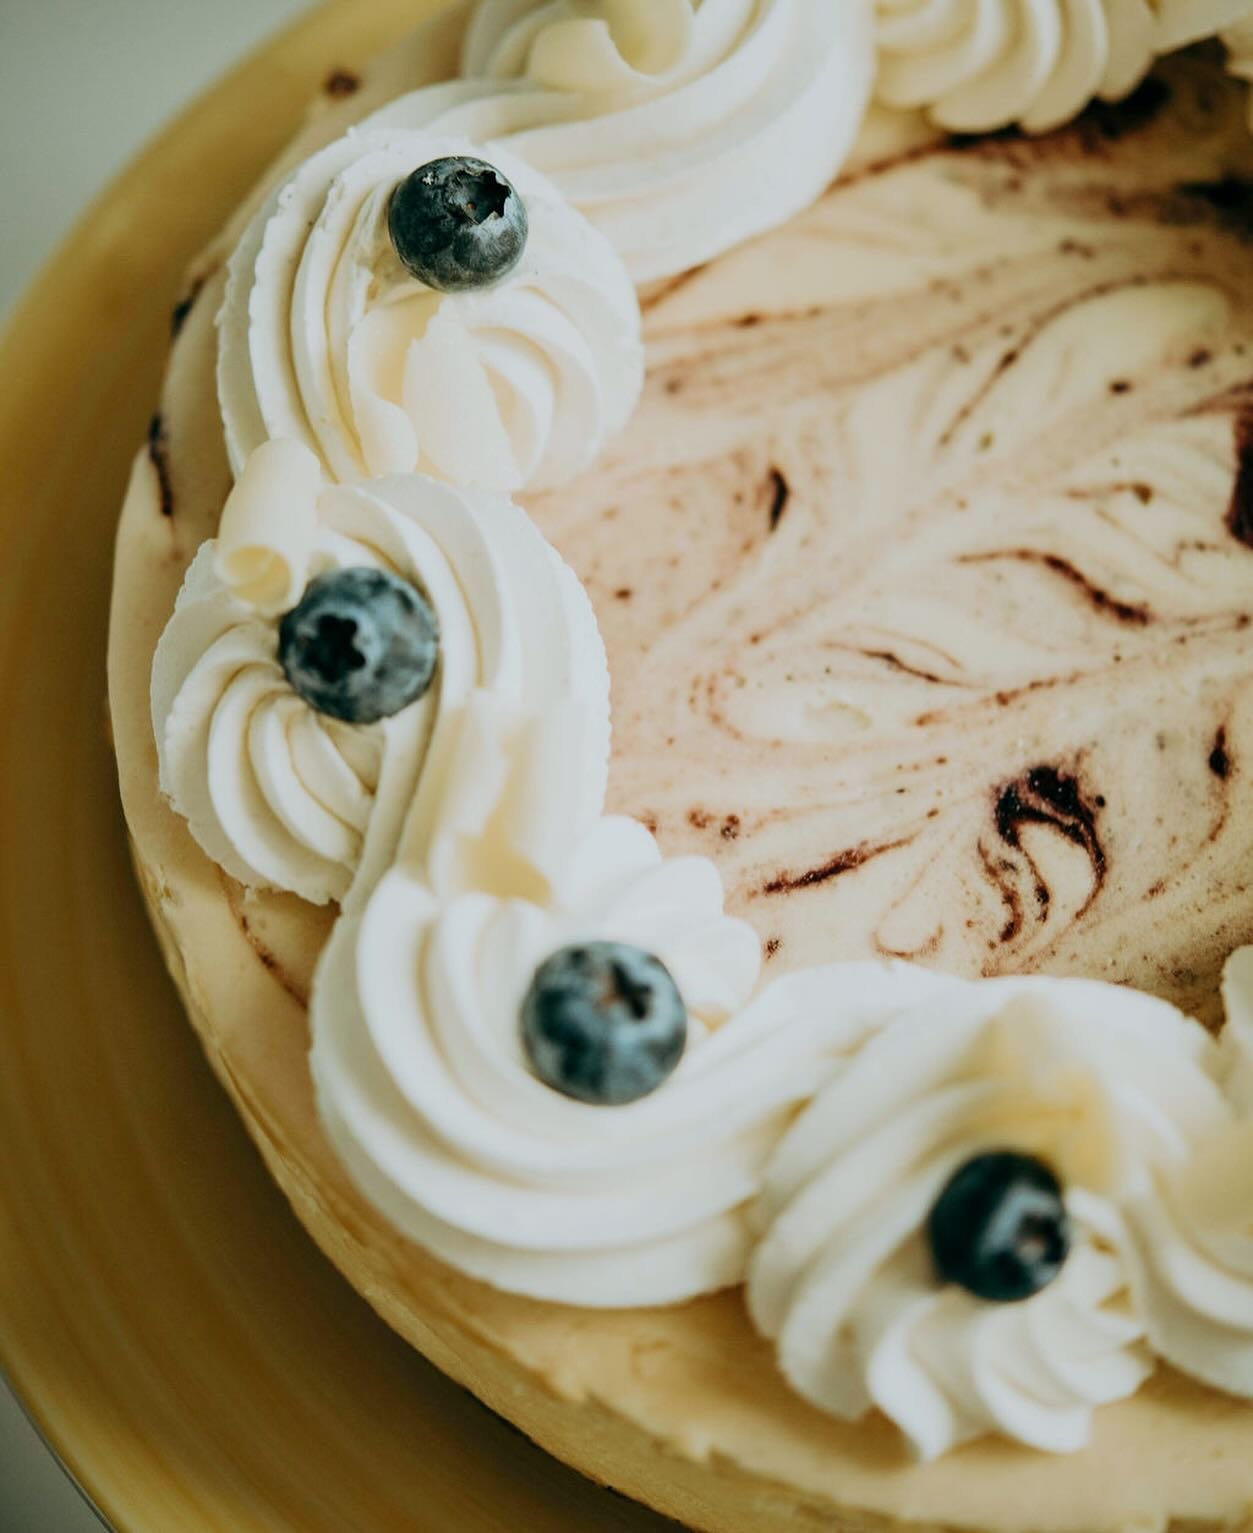 You definitely want to stop in and grab a slice of our Blueberry Lemon Cheesecake this week🫐🍋🍰

#lushcakesmn #mnbakery #mncakery #cakeshop #cheesecake #mnmade #eatlocal